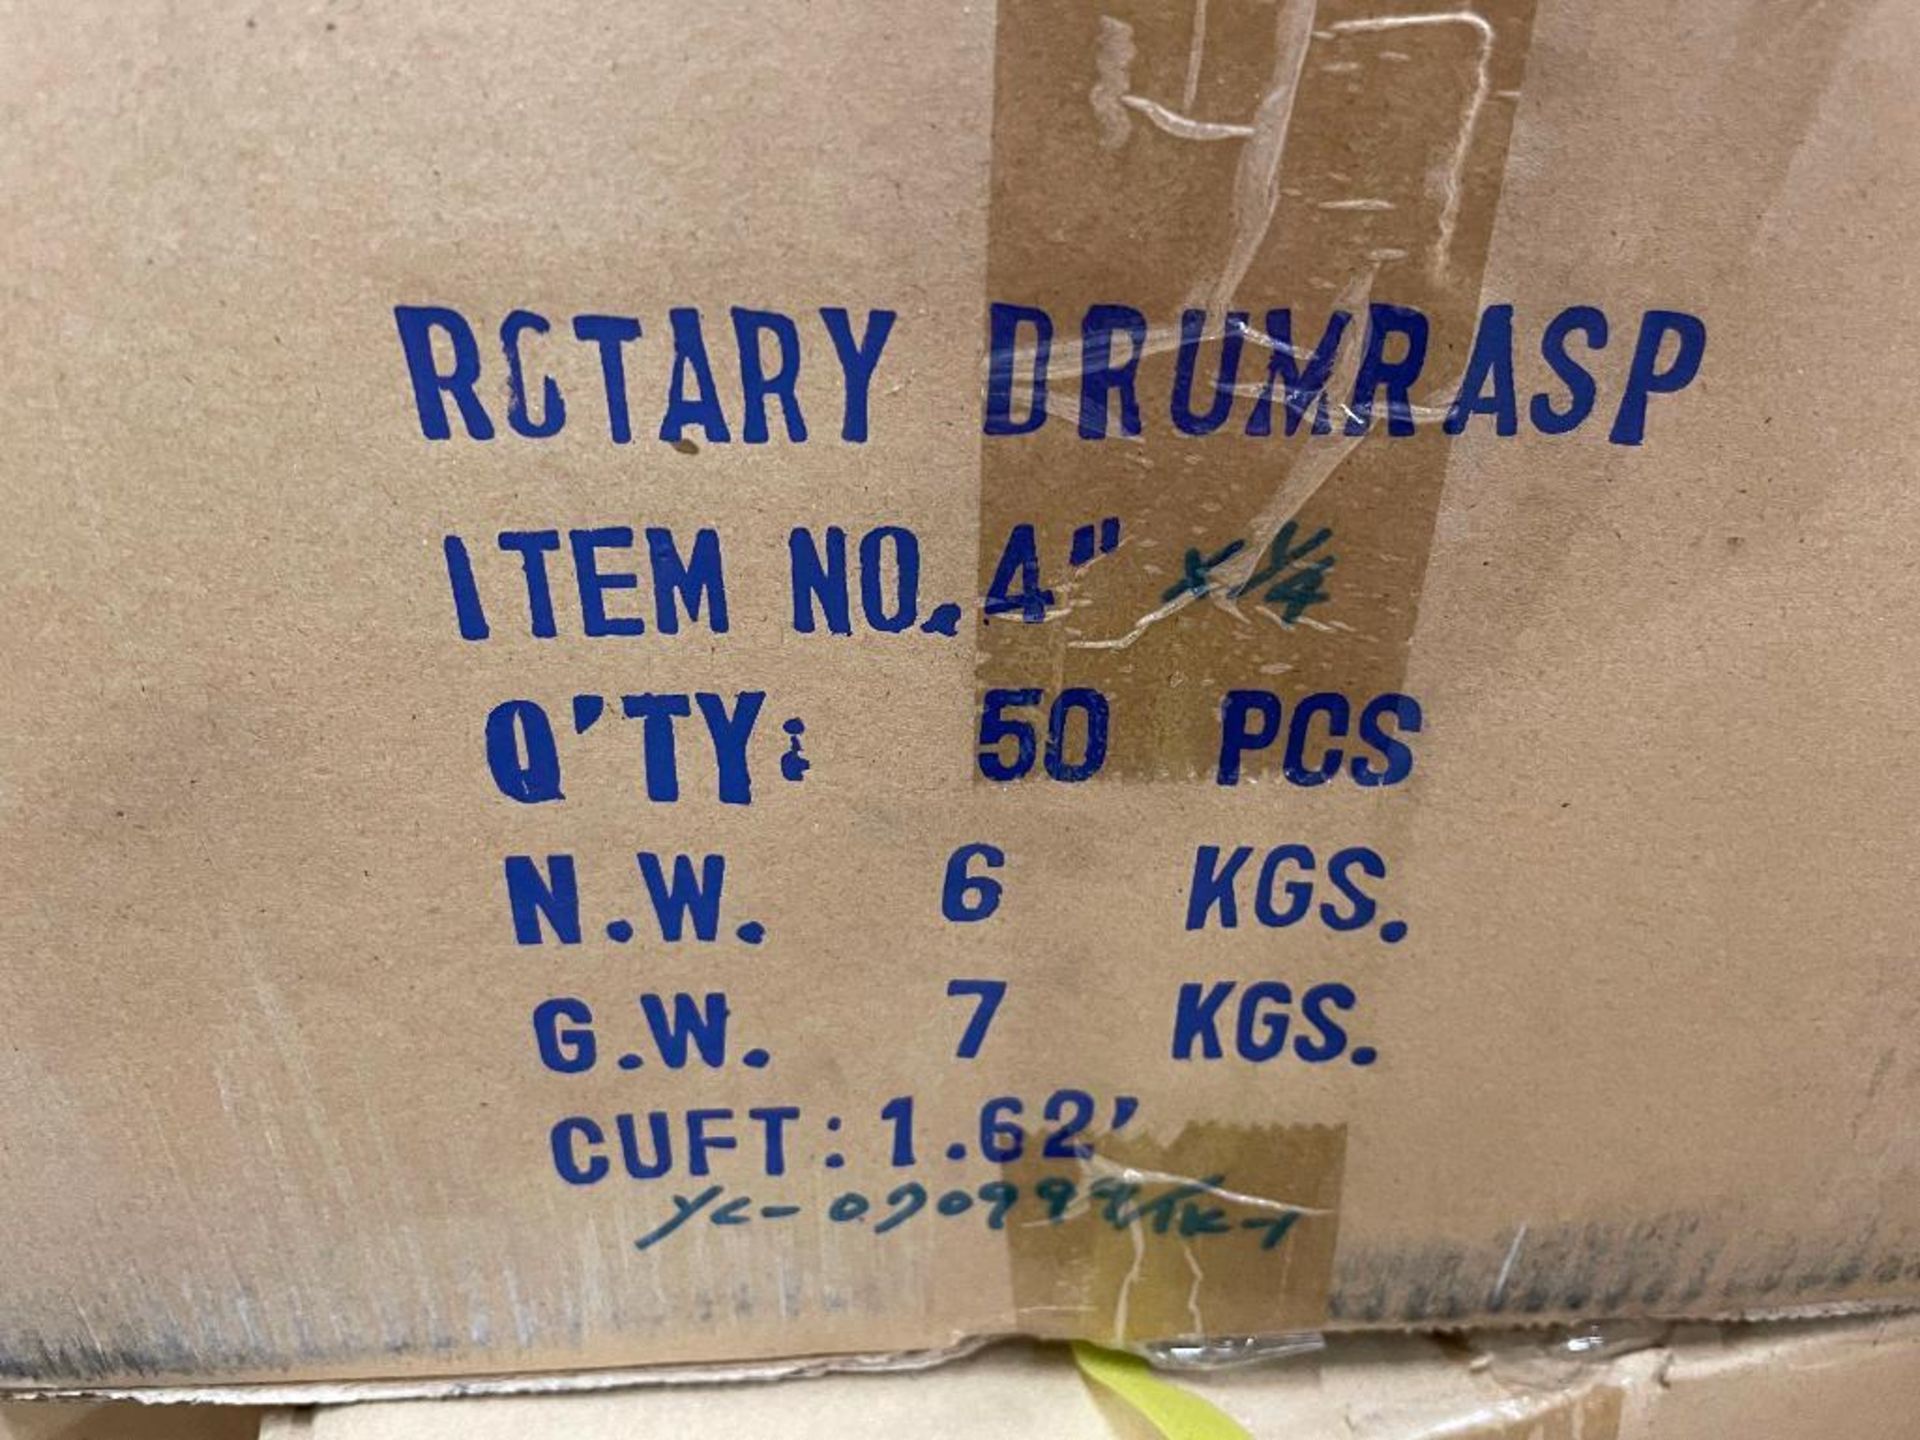 DESCRIPTION: (8) CASES OF 4" X 1/4" ROTARY DRUM RASPS. 50 PER CASE. 400 IN LOT. BRAND / MODEL: EAZY - Image 2 of 3